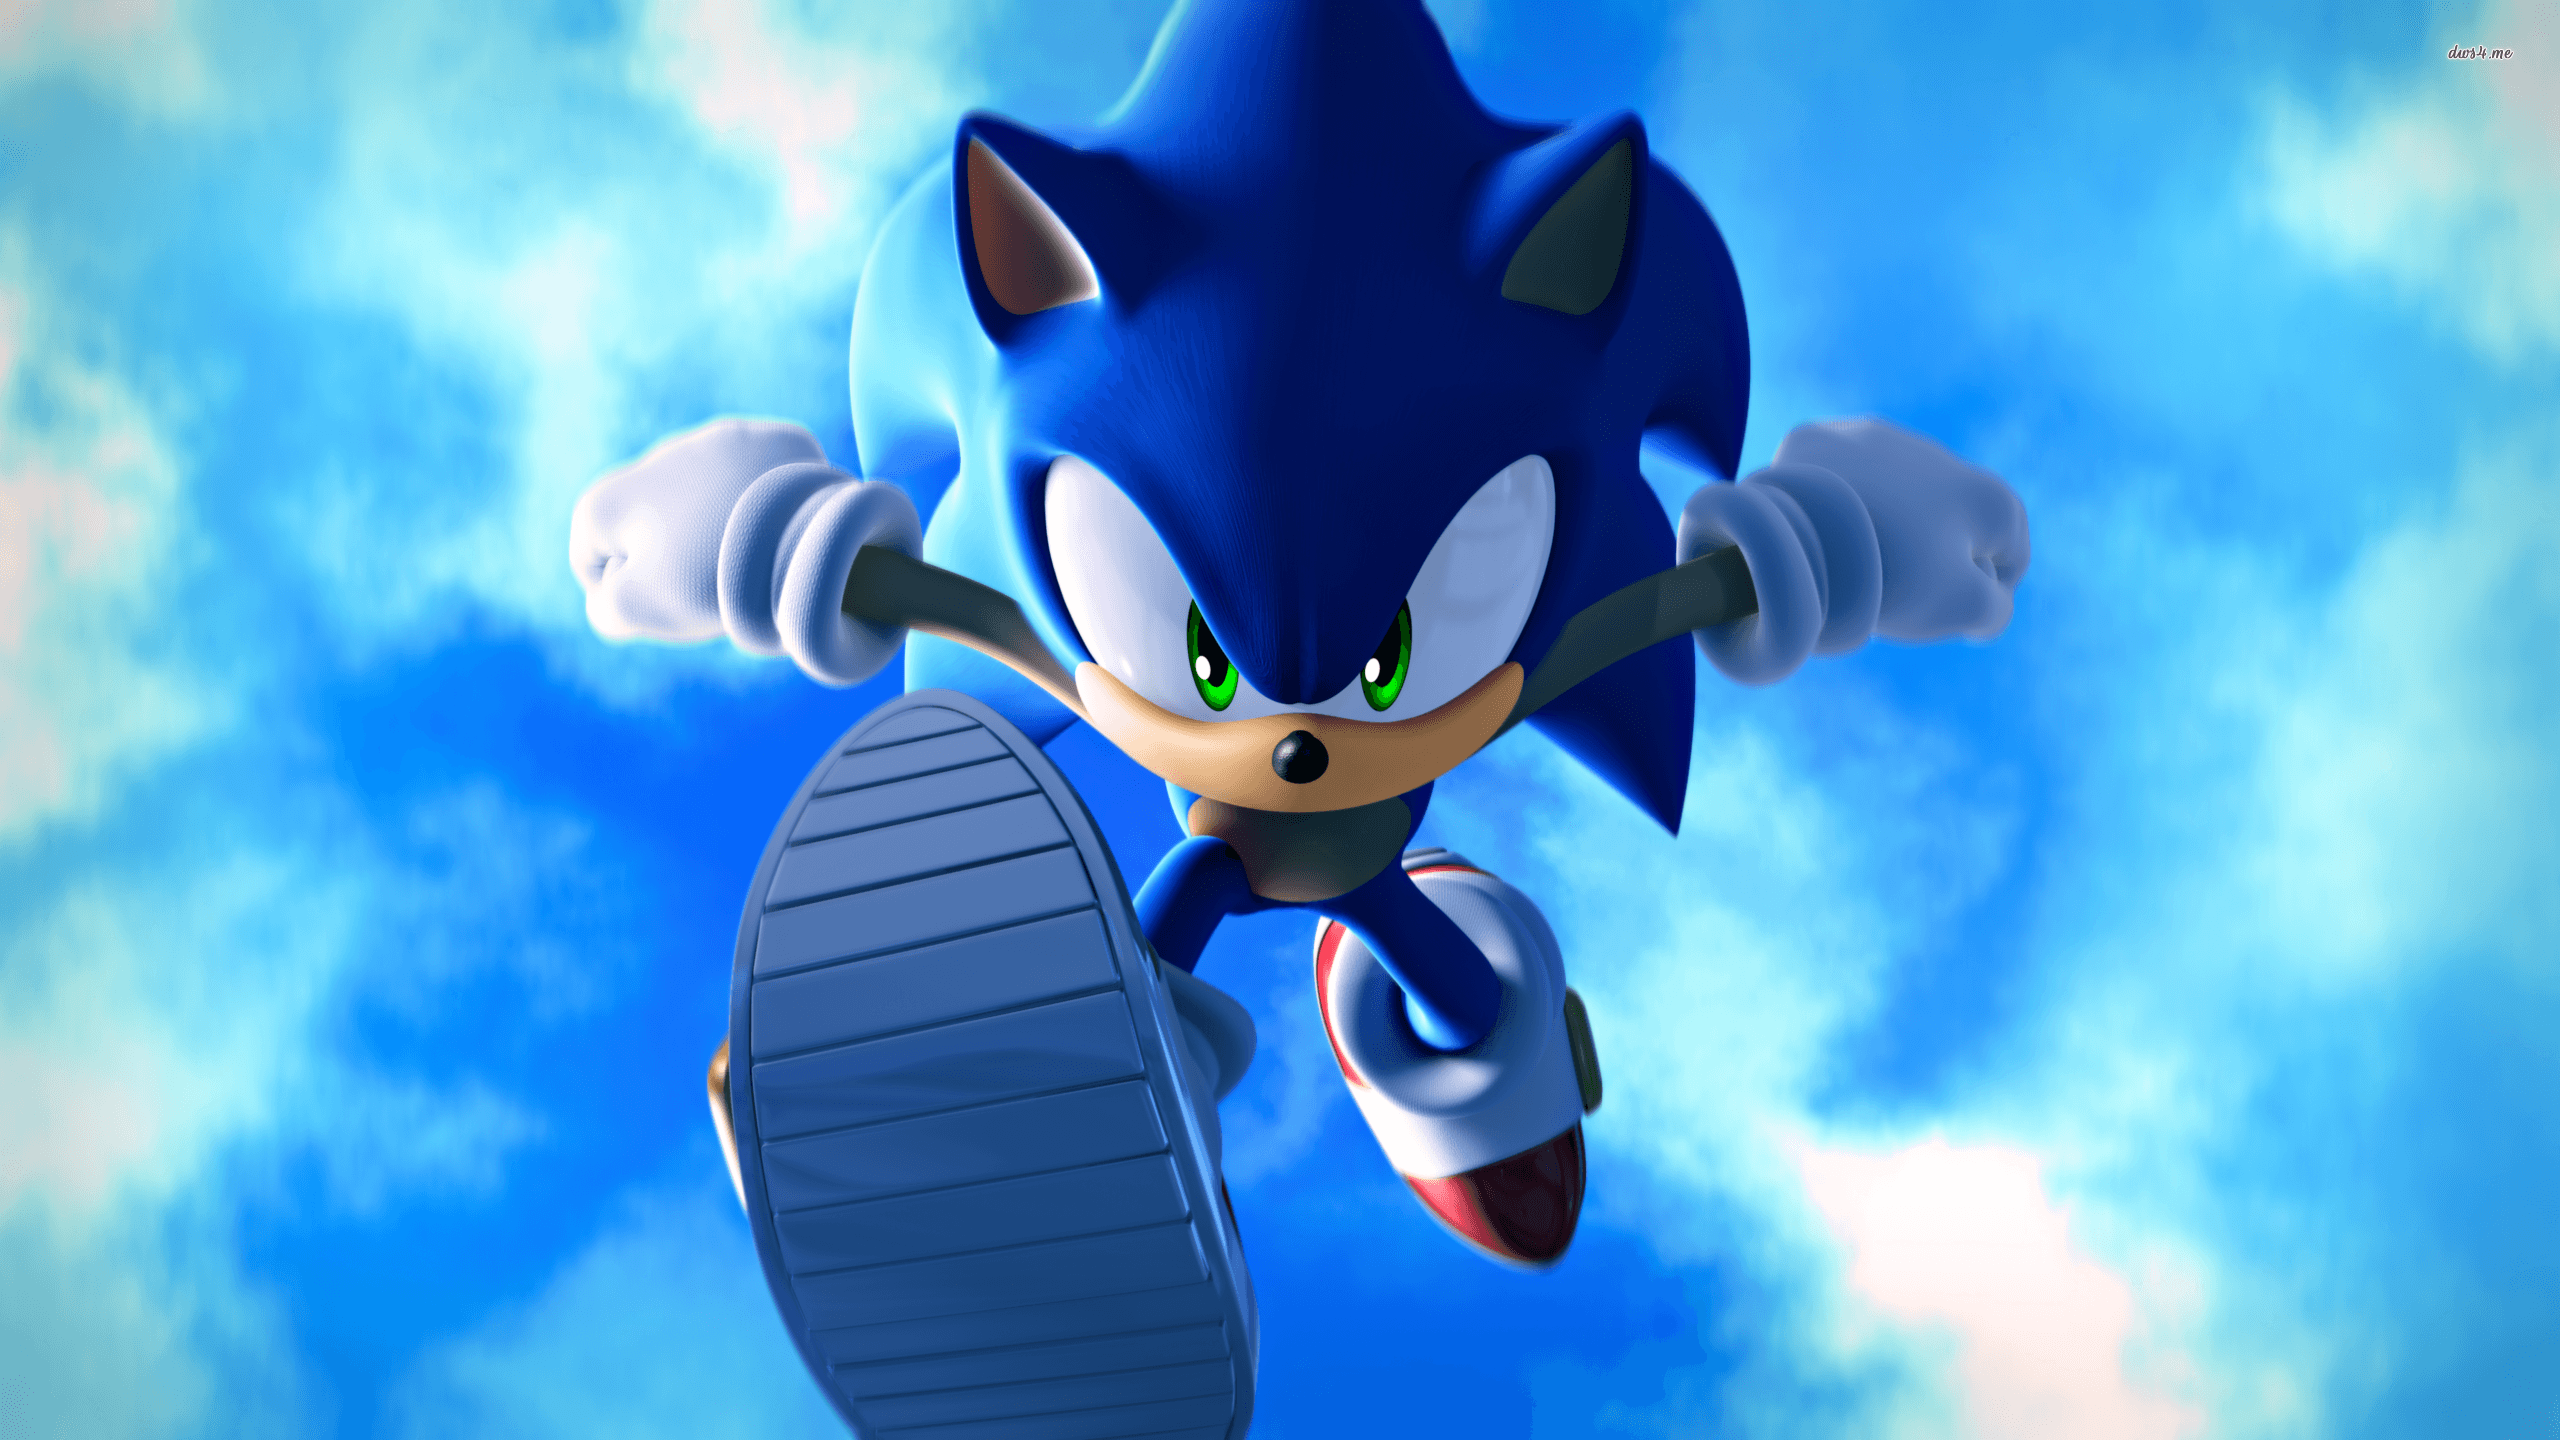 Furnace Sonic Wallpapers - Wallpaper Cave